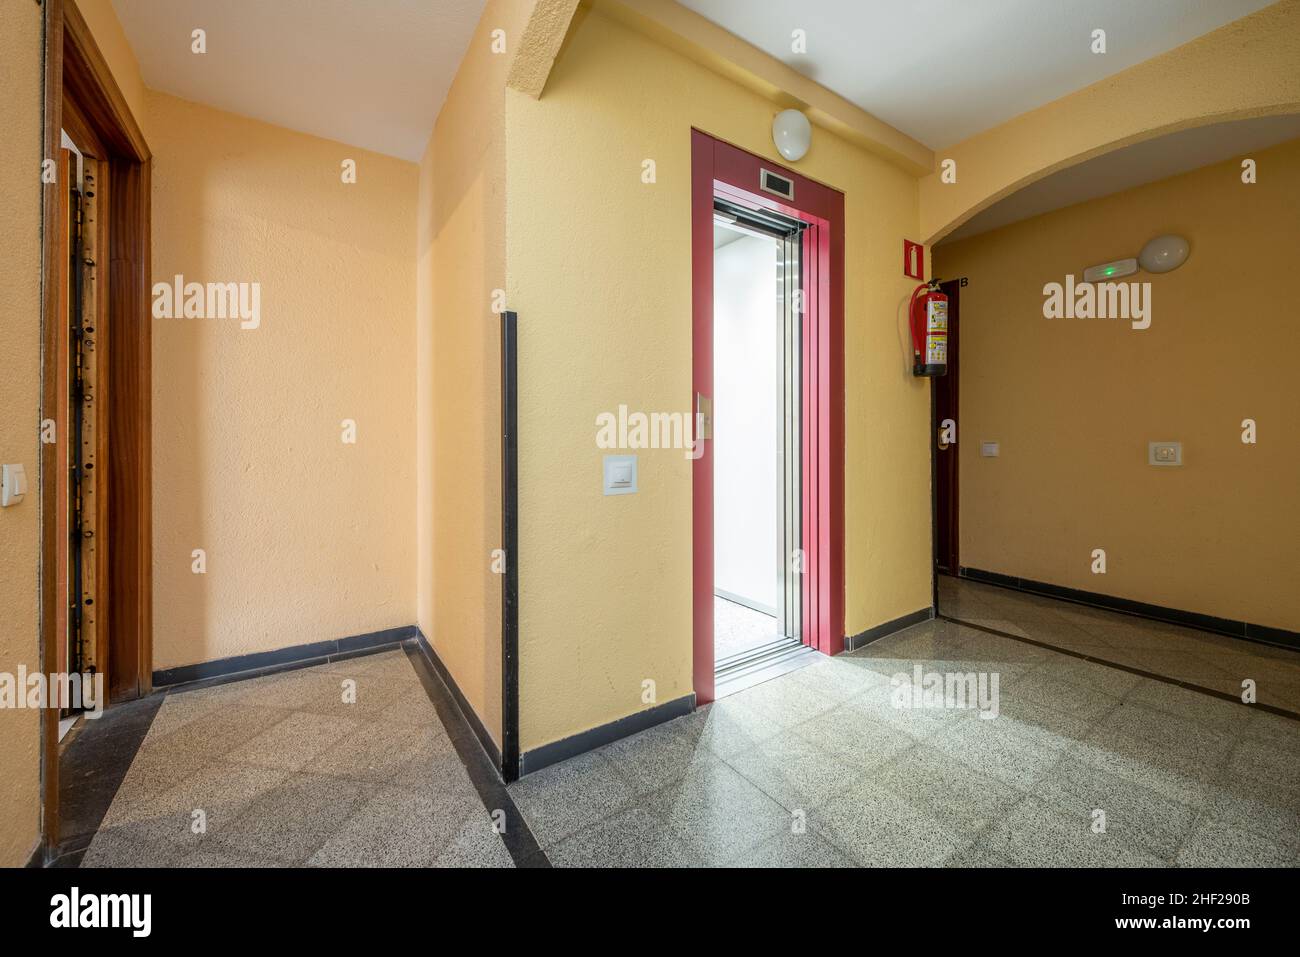 Common areas of a residential building with a red elevator and terrazzo floors Stock Photo